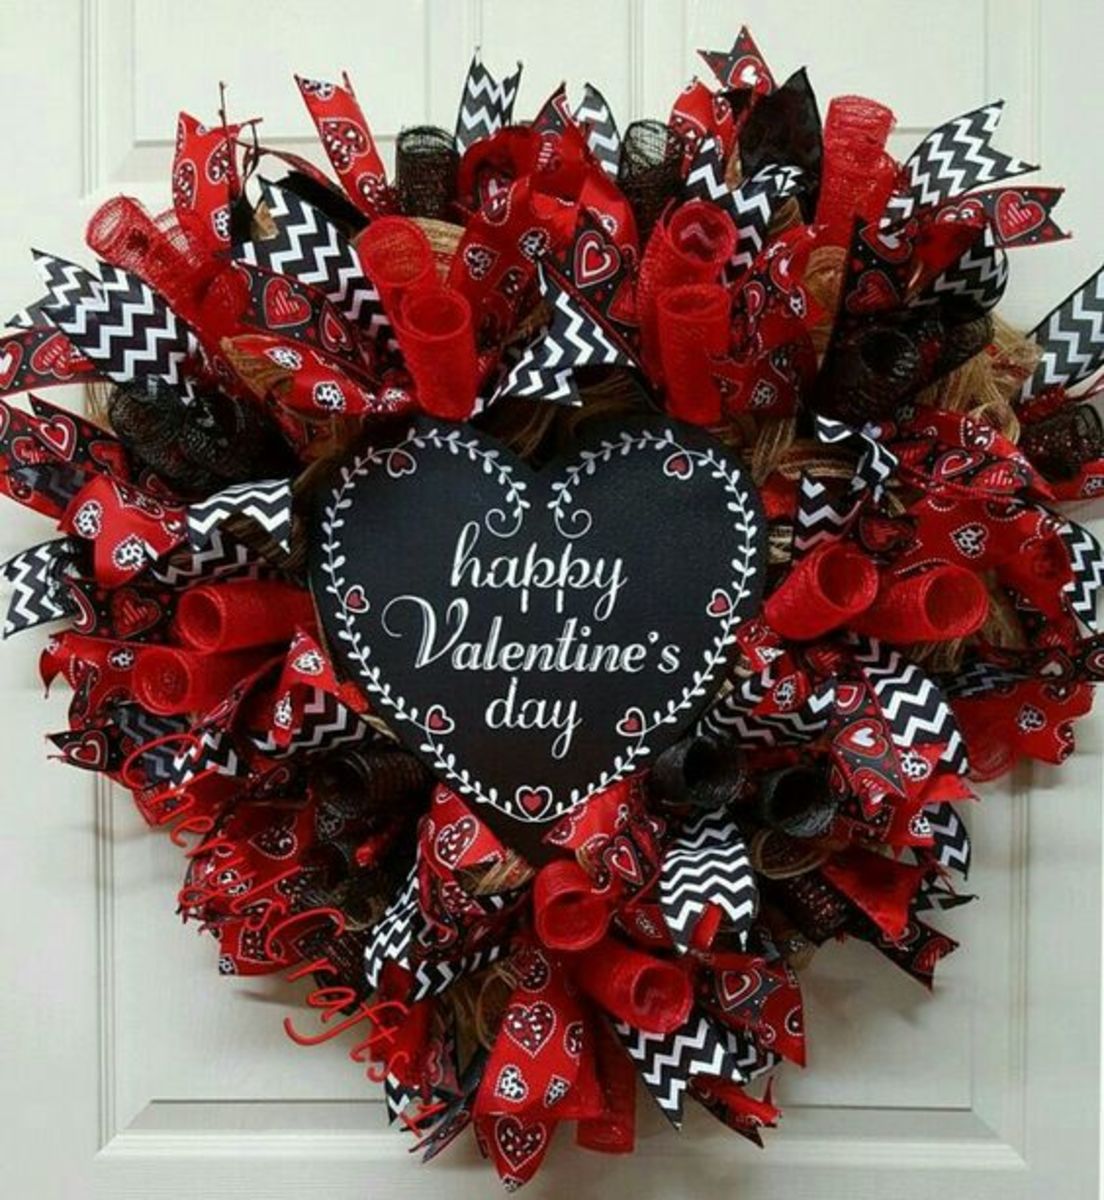 Glam Black, White, and Red Wreath